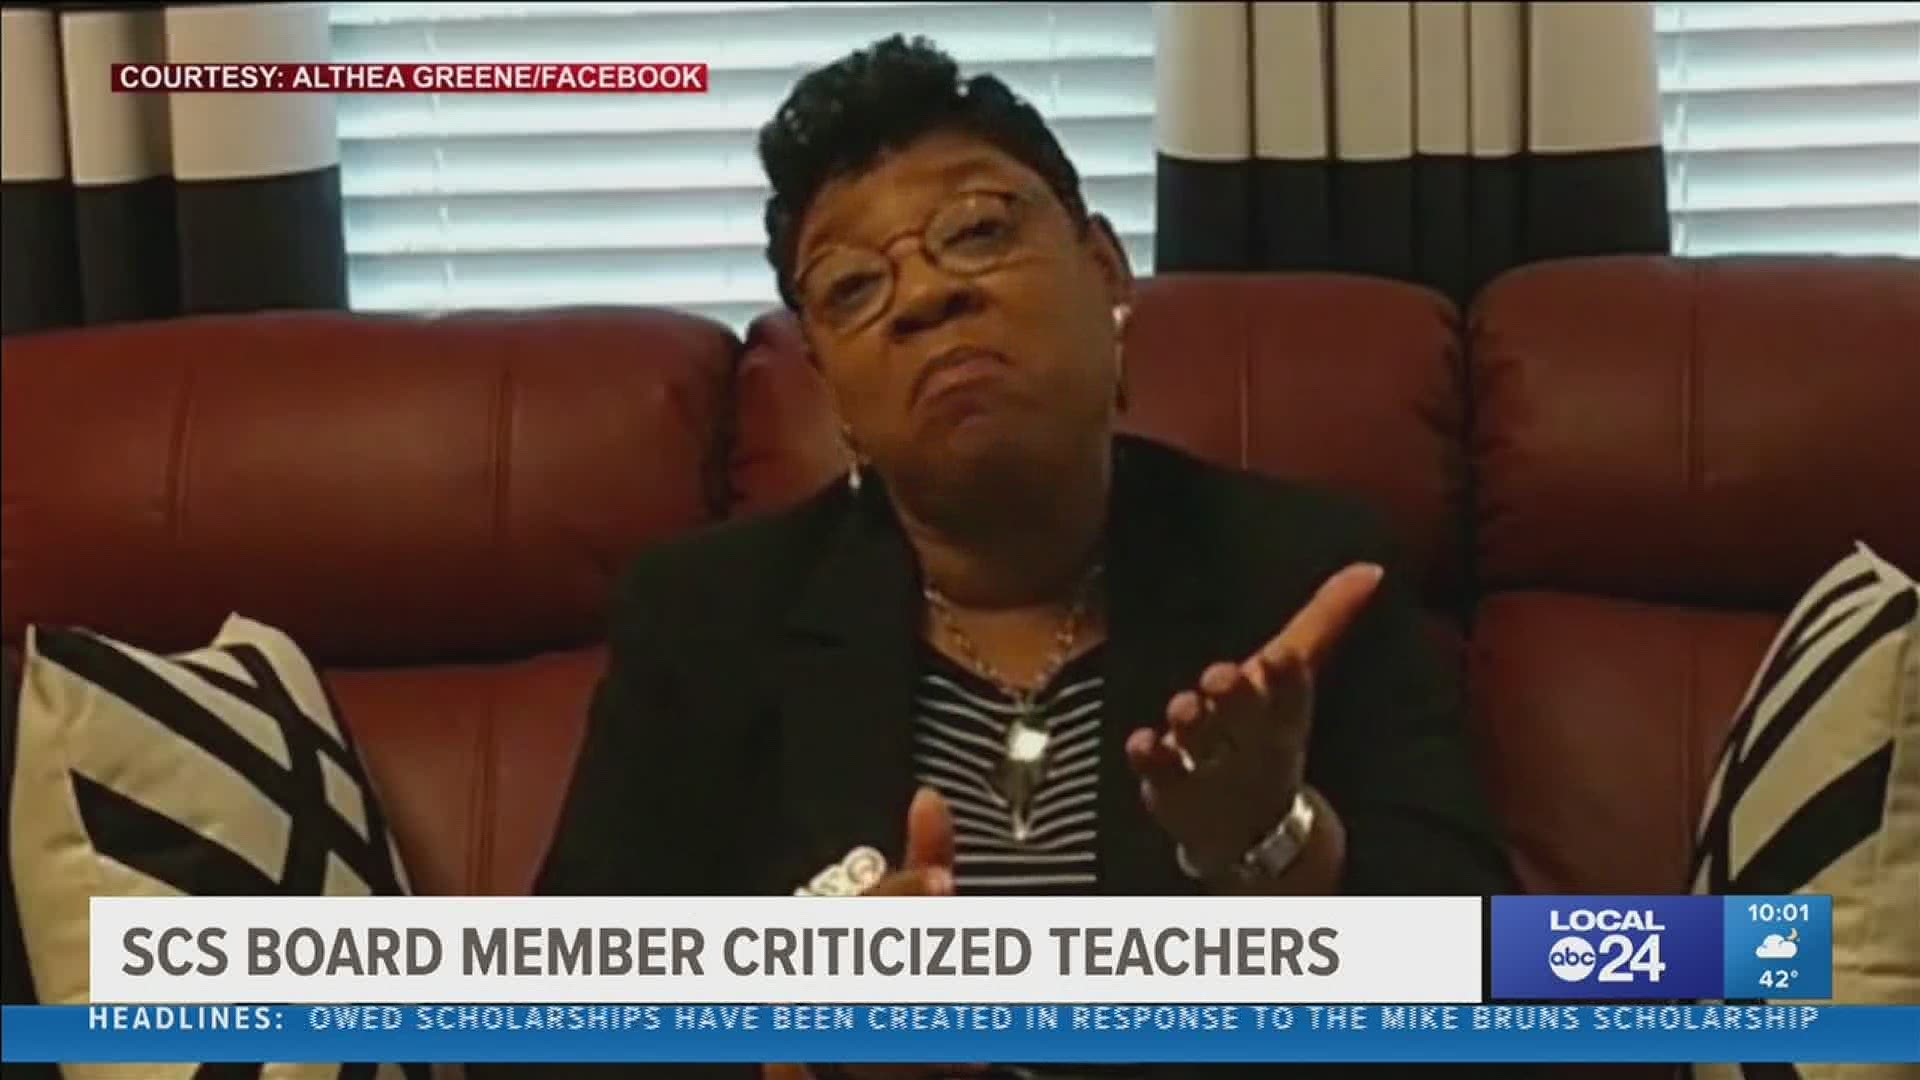 Rev. Althea Greene criticized some SCS teachers in her congregation saying they "didn't do anything" during virtual learning.